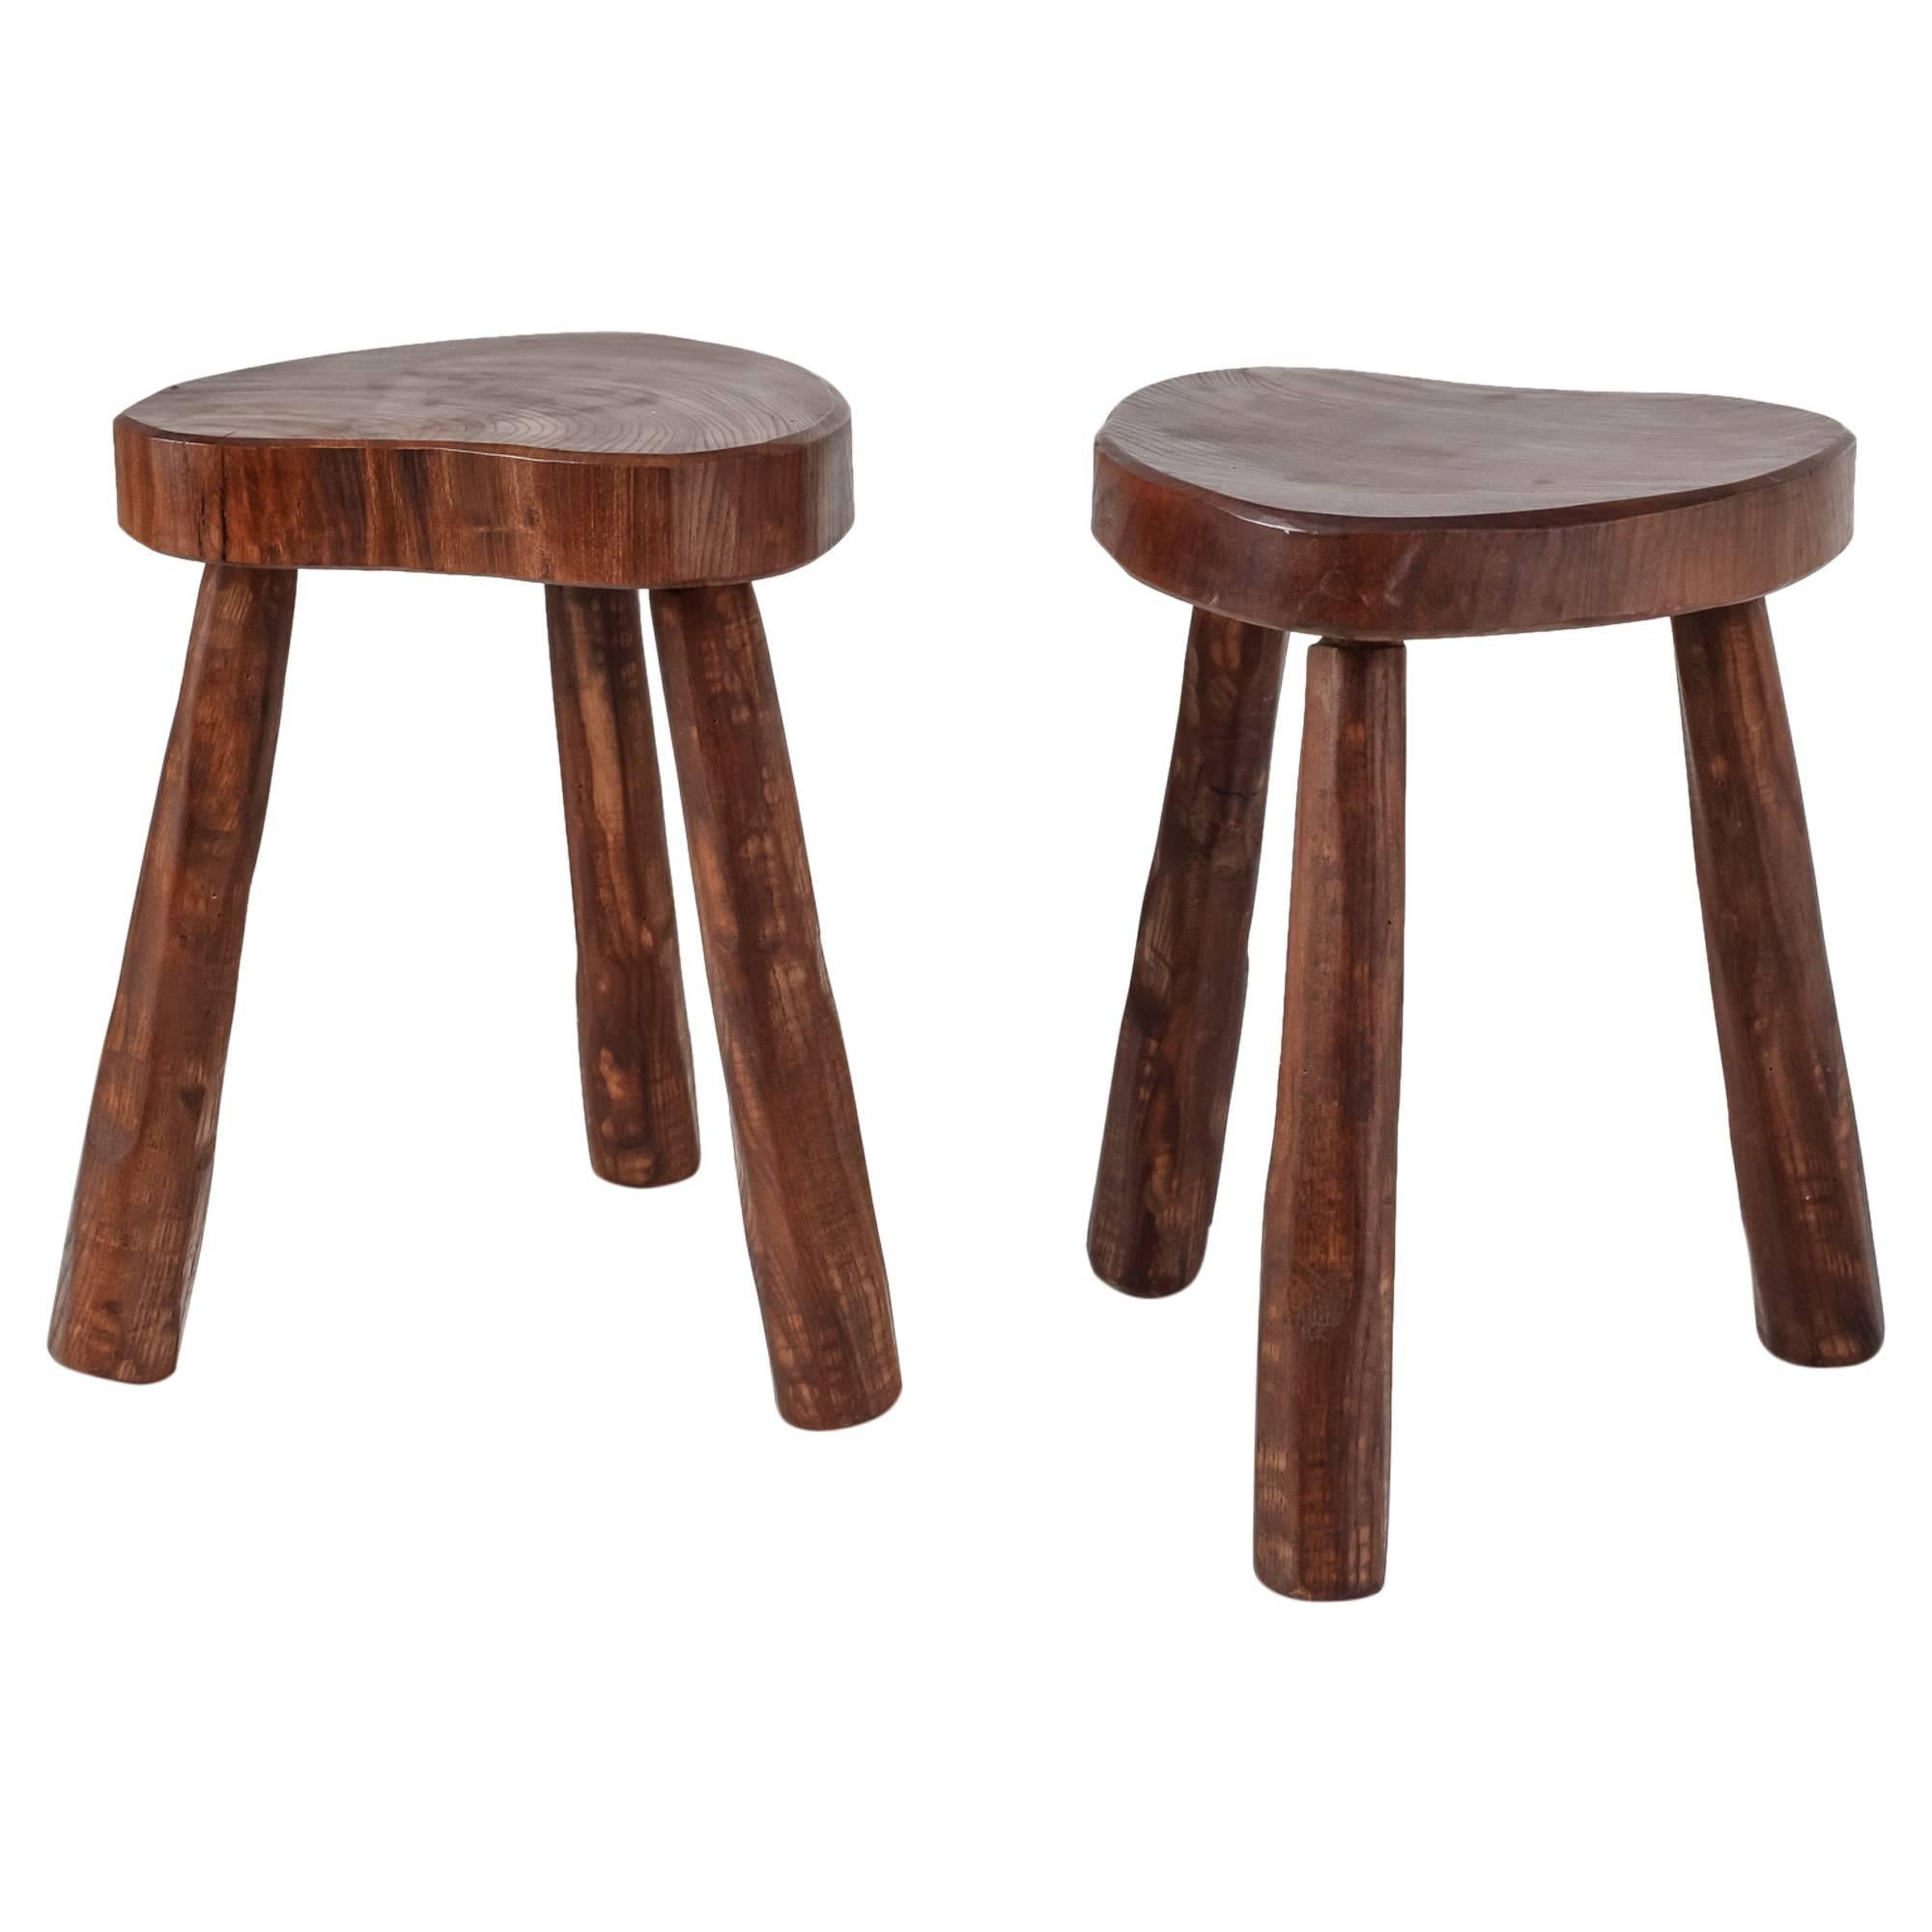 Handcrafted Pair of Tripod Stools with Heart Shaped Seat, France, 1950s